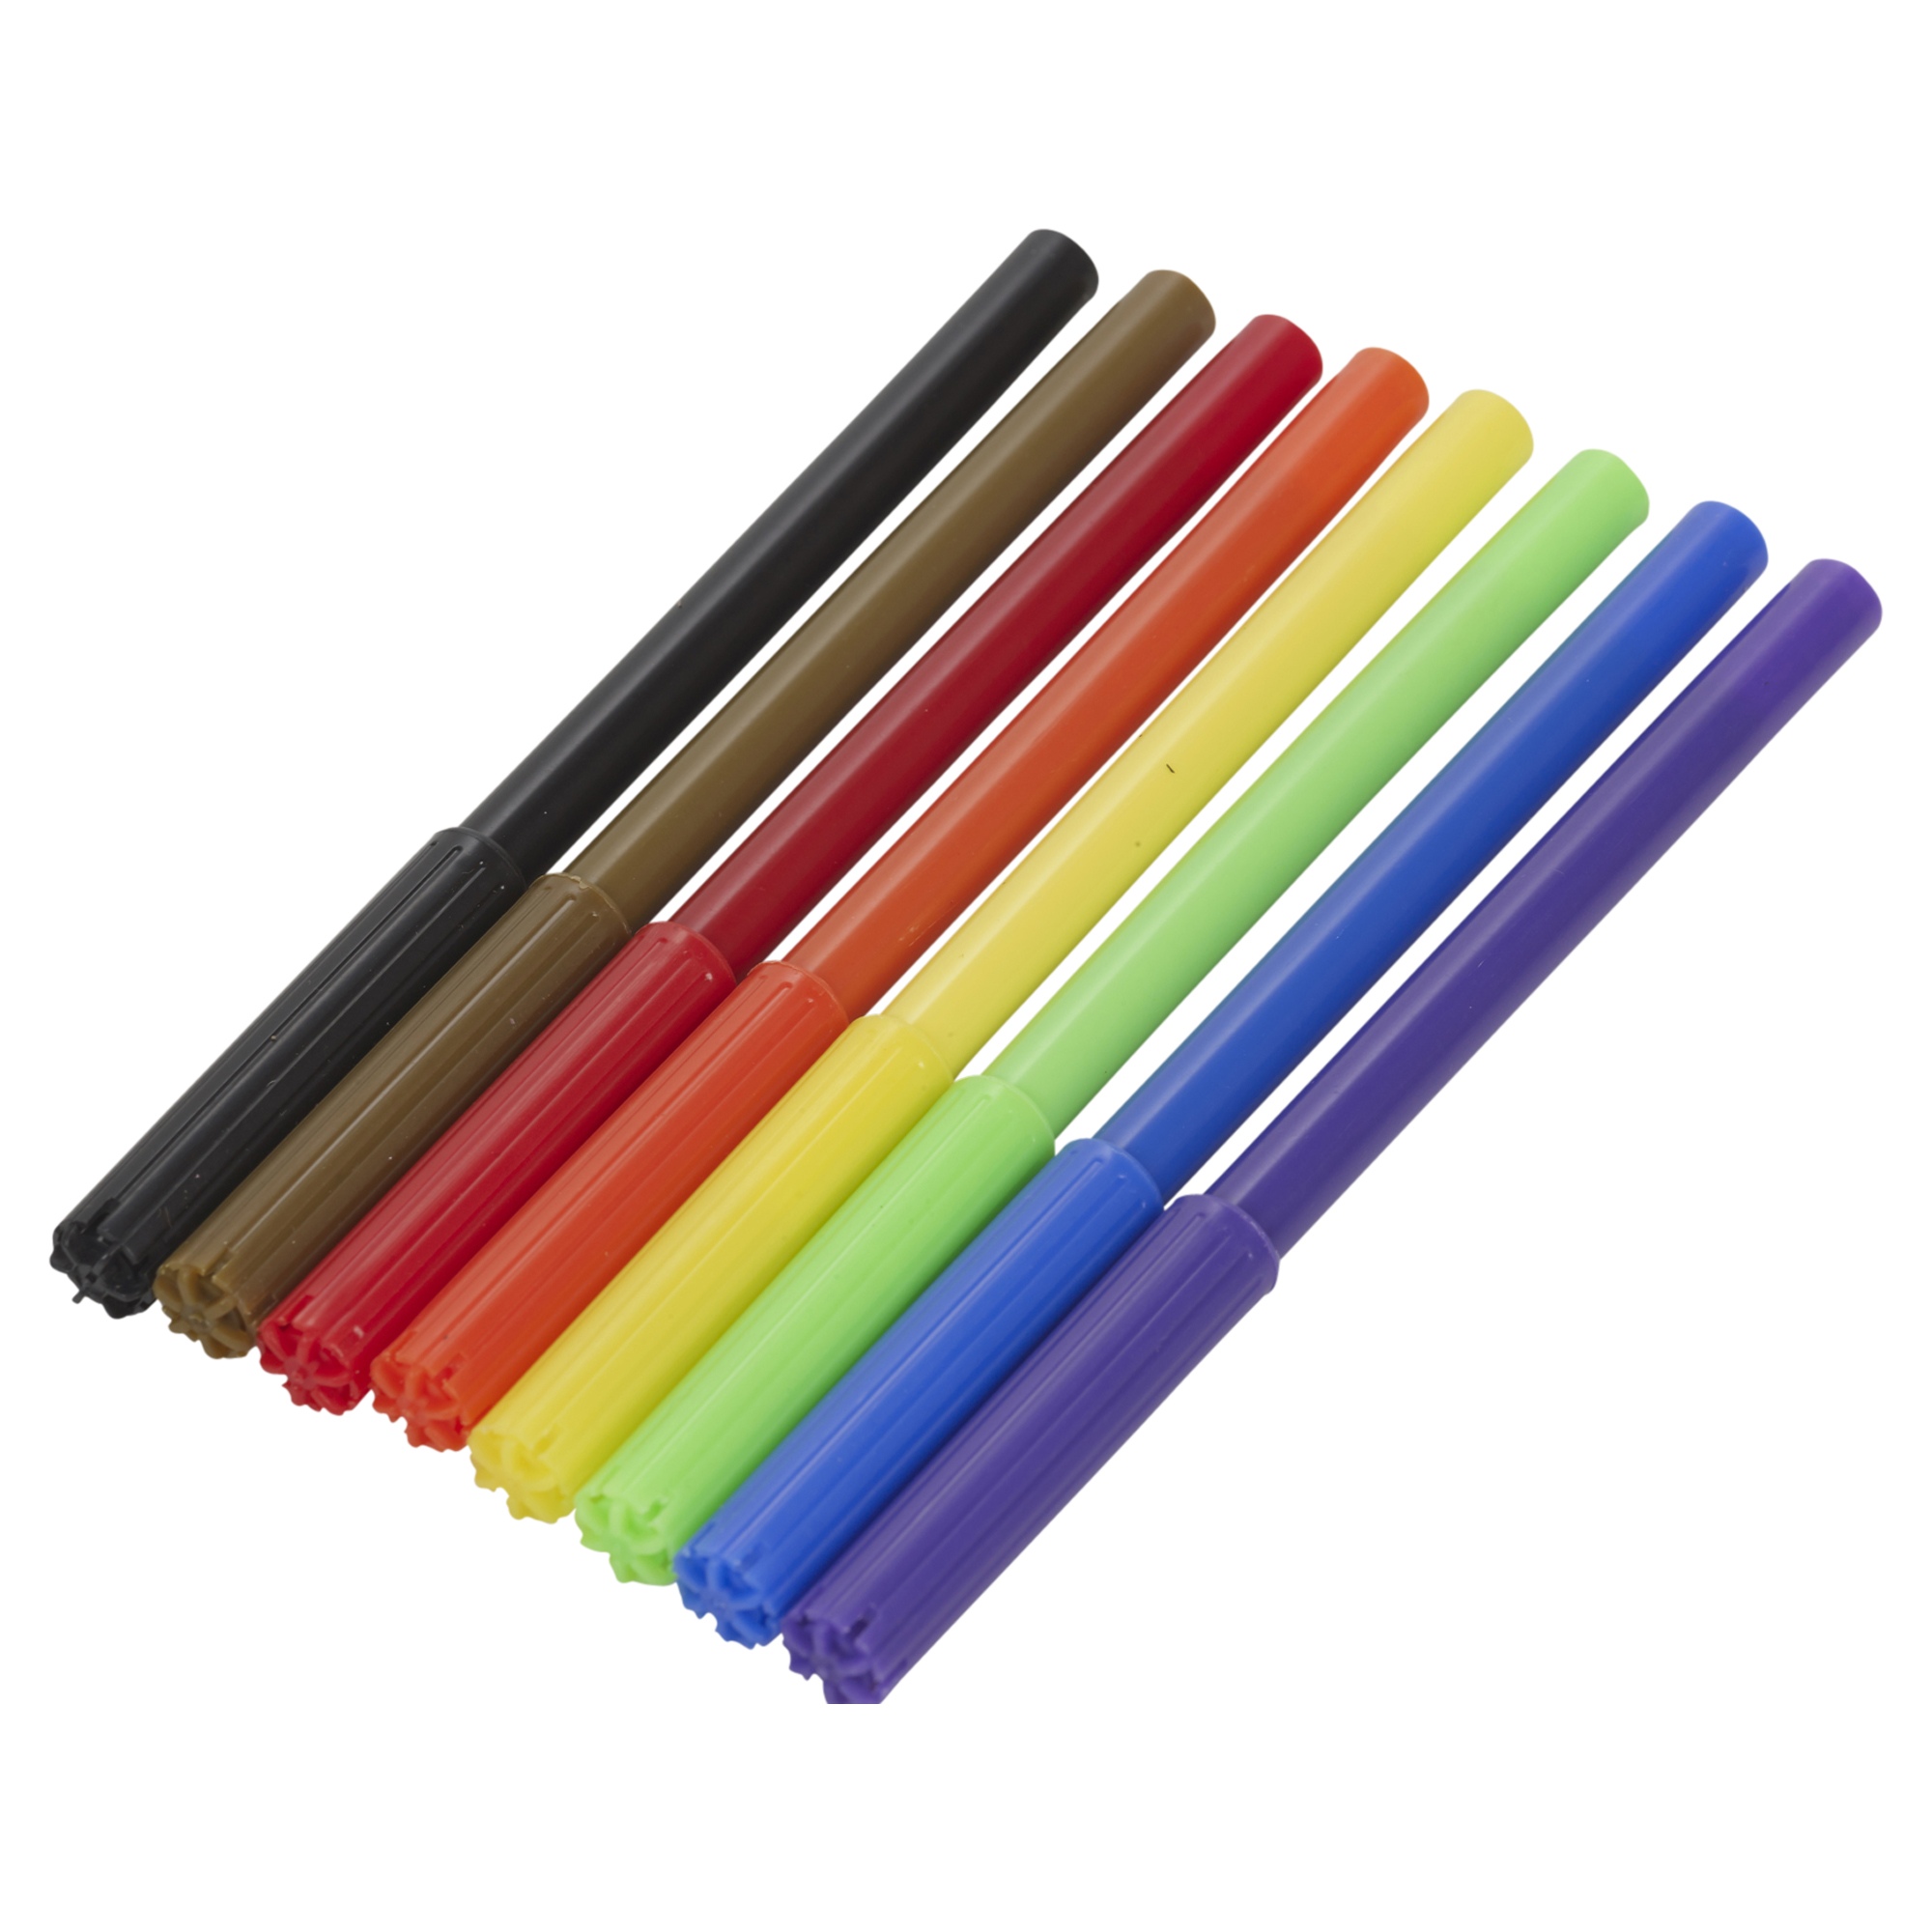 50pc Colourful Assorted Topwrite Felt Tip Pens Colouring Drawing